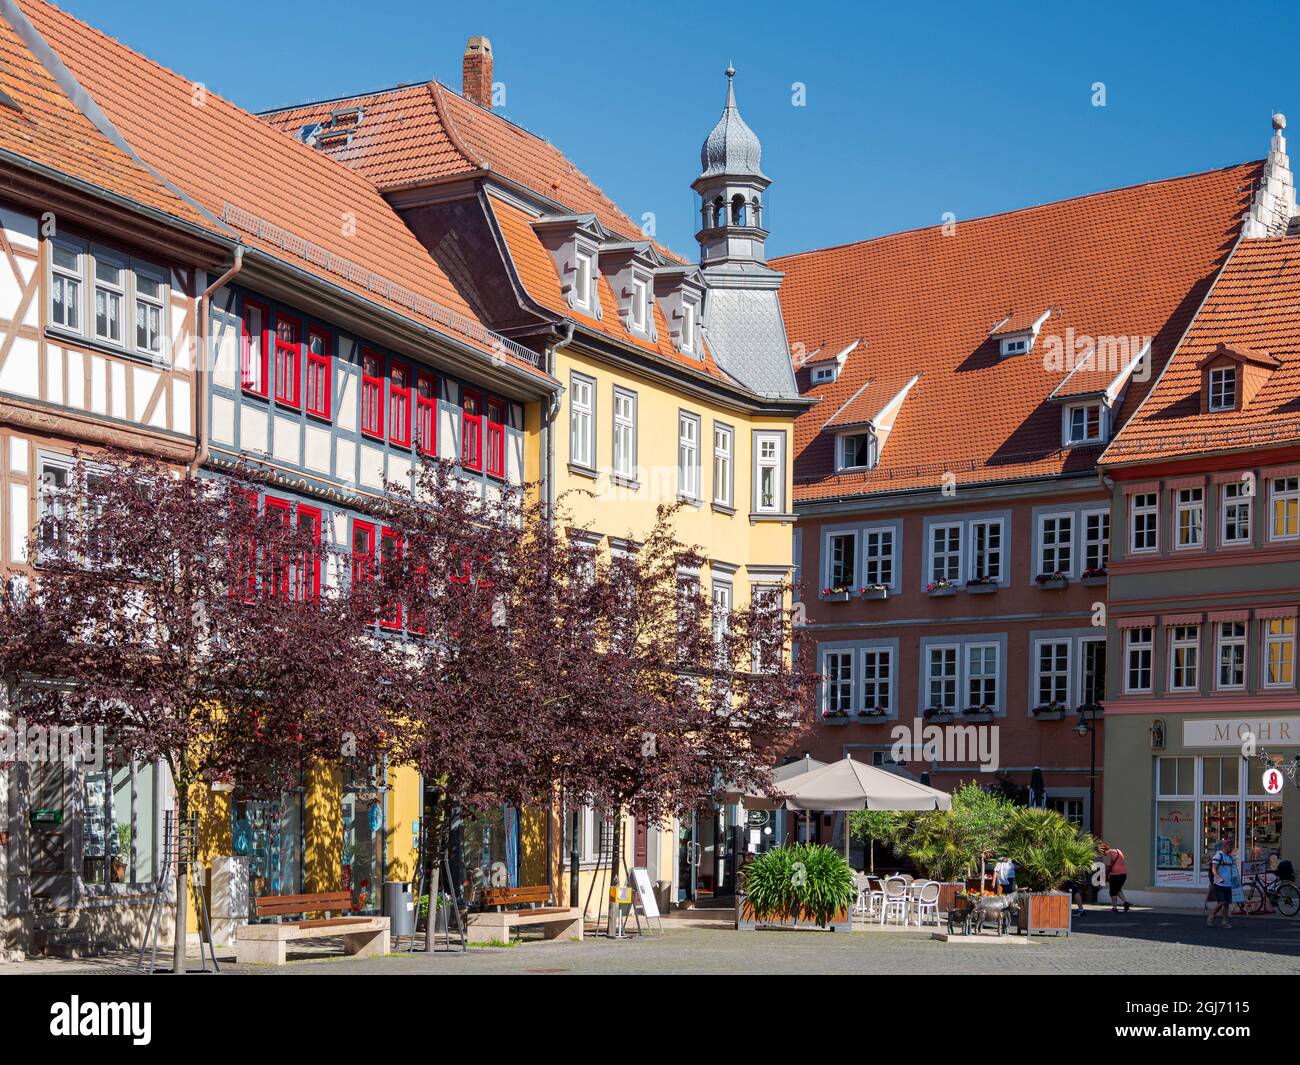 Old town houses built with traditional timber framing at the square Neumarkt. The medieval town and spa Bad Langensalza in Thuringia. Germany Stock Photo